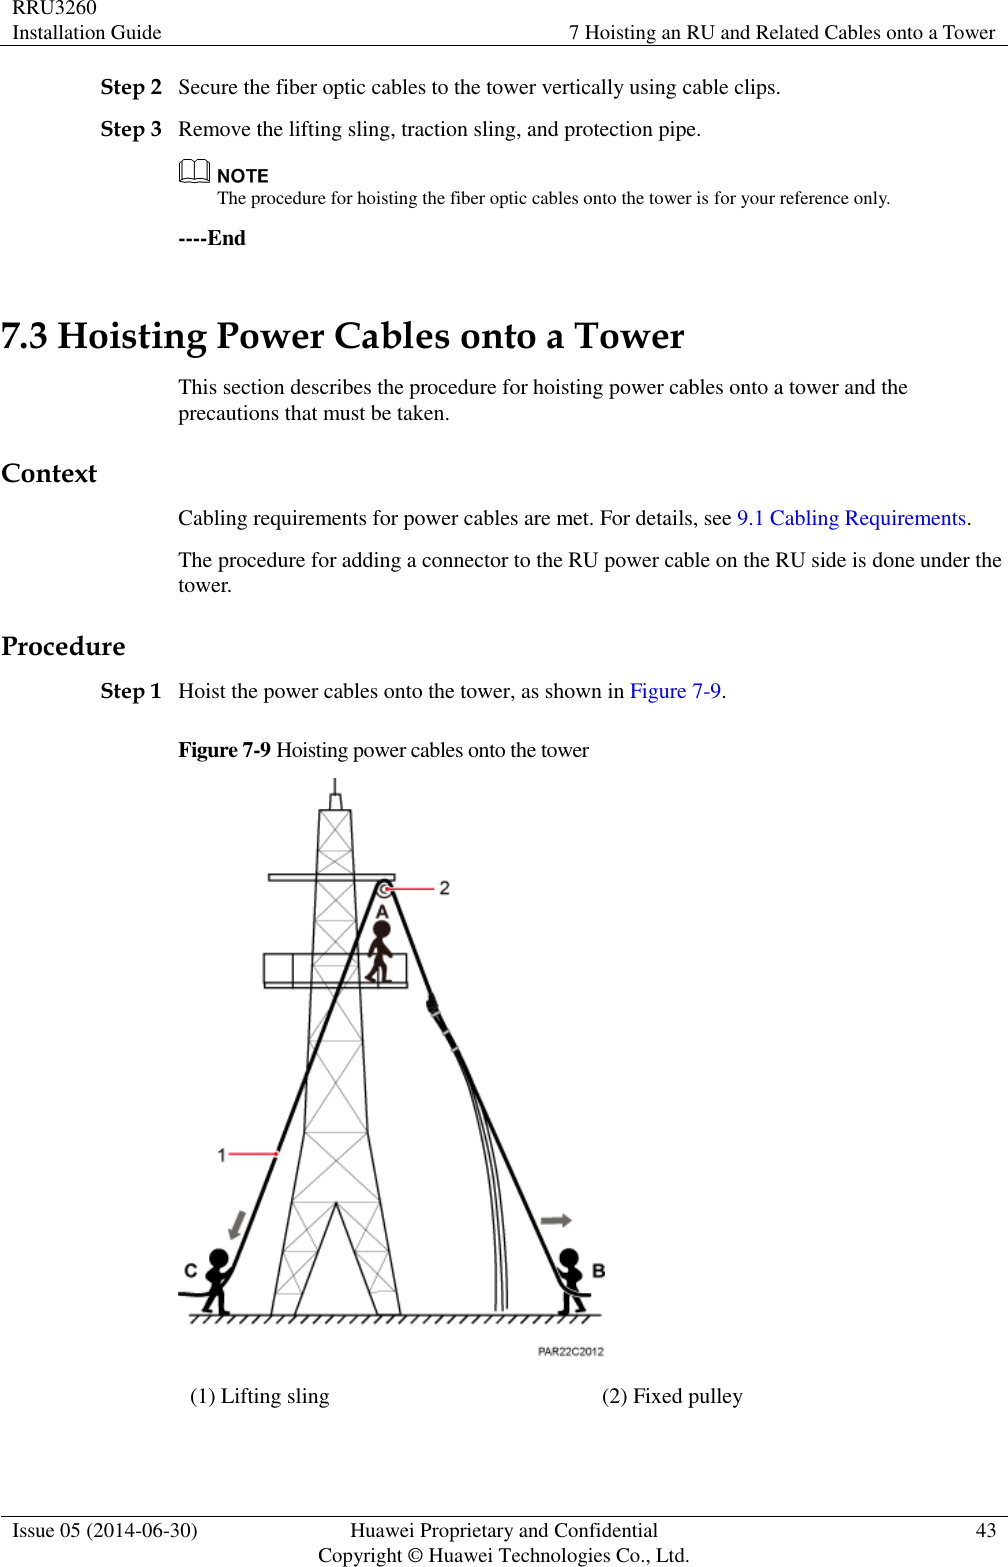 RRU3260 Installation Guide 7 Hoisting an RU and Related Cables onto a Tower  Issue 05 (2014-06-30) Huawei Proprietary and Confidential                                     Copyright © Huawei Technologies Co., Ltd. 43  Step 2 Secure the fiber optic cables to the tower vertically using cable clips. Step 3 Remove the lifting sling, traction sling, and protection pipe.  The procedure for hoisting the fiber optic cables onto the tower is for your reference only. ----End 7.3 Hoisting Power Cables onto a Tower This section describes the procedure for hoisting power cables onto a tower and the precautions that must be taken. Context Cabling requirements for power cables are met. For details, see 9.1 Cabling Requirements. The procedure for adding a connector to the RU power cable on the RU side is done under the tower. Procedure Step 1 Hoist the power cables onto the tower, as shown in Figure 7-9. Figure 7-9 Hoisting power cables onto the tower  (1) Lifting sling (2) Fixed pulley  